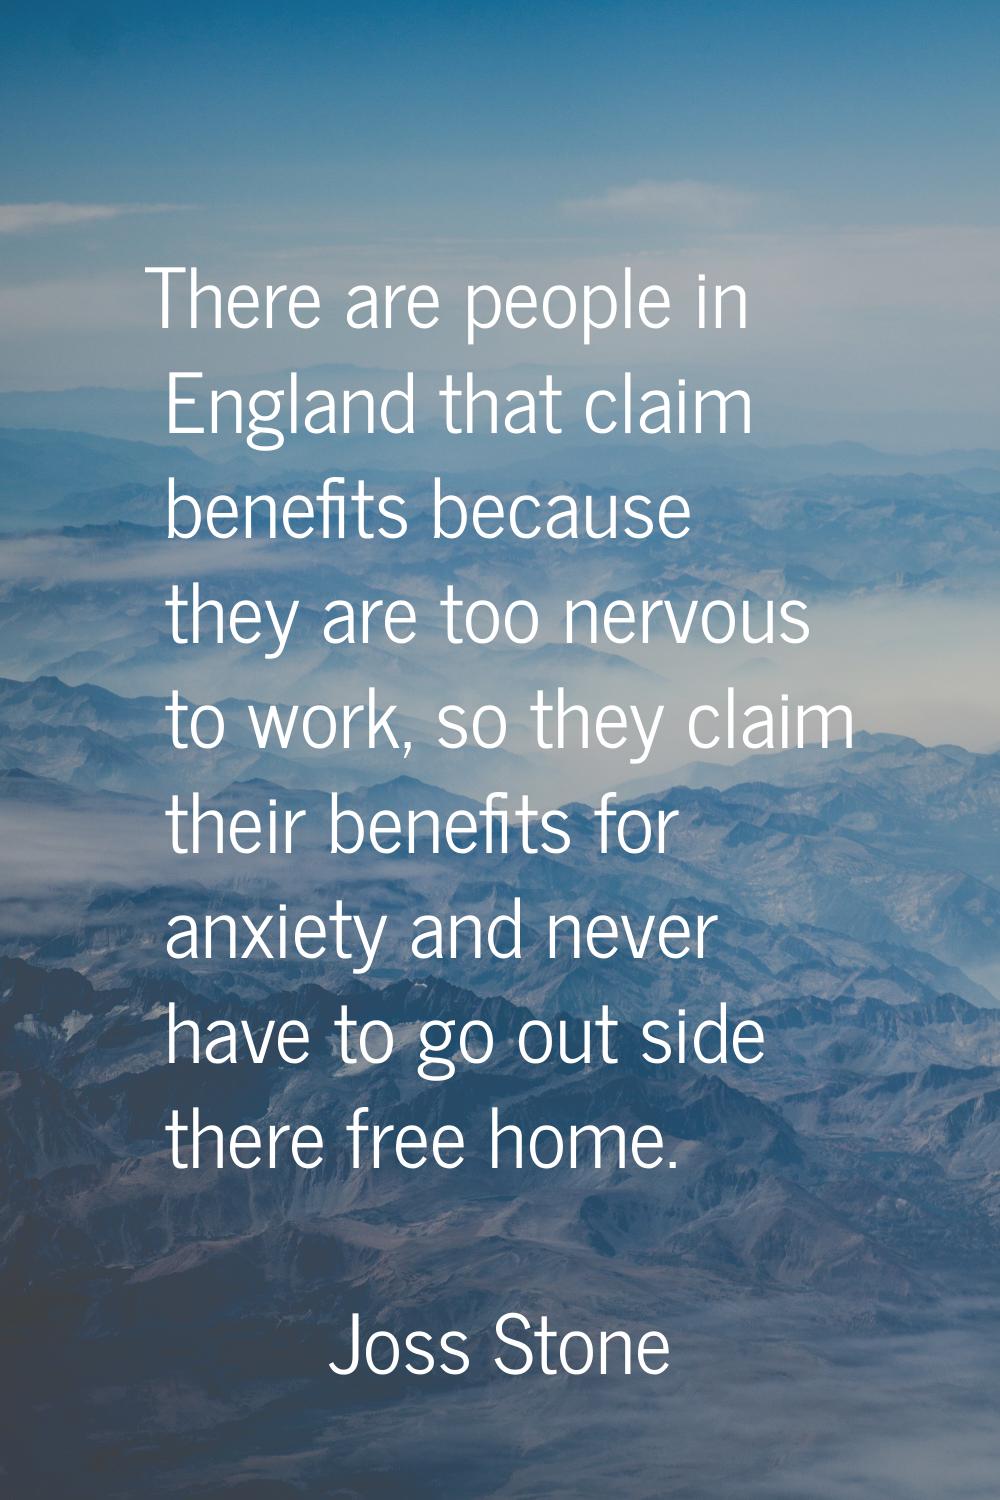 There are people in England that claim benefits because they are too nervous to work, so they claim